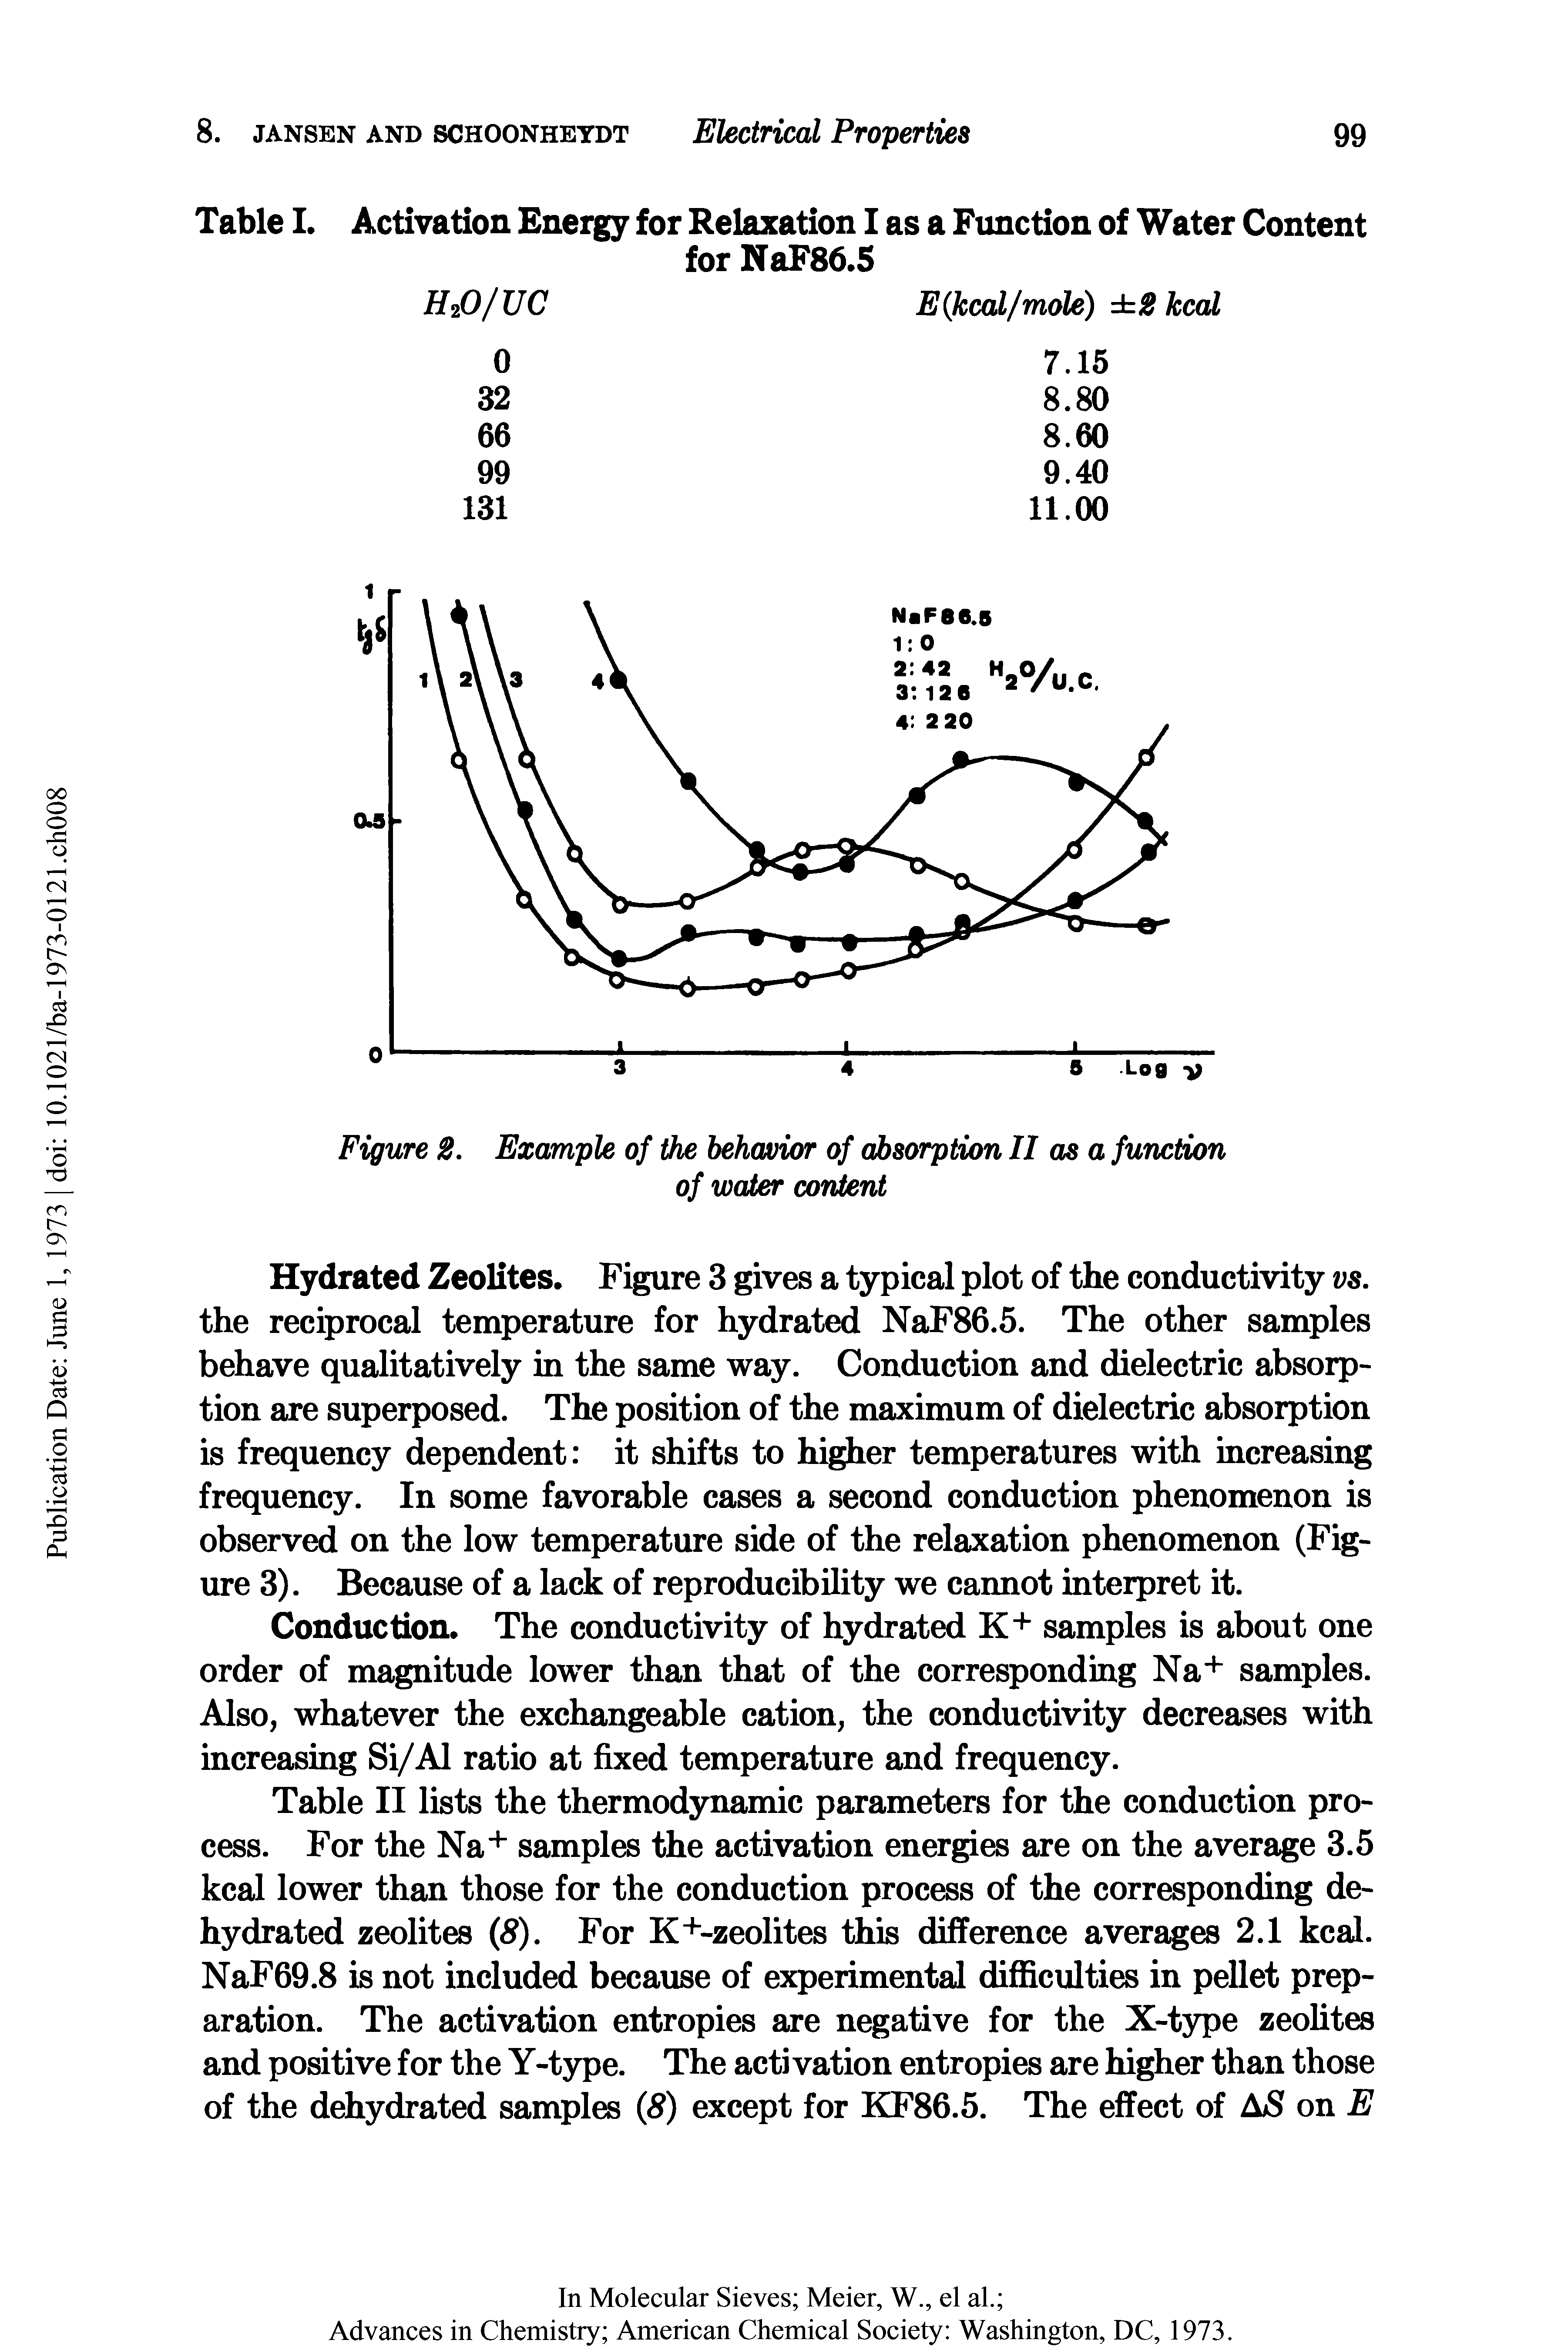 Table II lists the thermodynamic parameters for the conduction process. For the Na+ samples the activation energies are on the average 3.5 kcal lower than those for the conduction process of the corresponding dehydrated zeolites (<8). For K+-zeolites this difference averages 2.1 kcal. NaF69.8 is not included because of experimental difficulties in pellet preparation. The activation entropies are negative for the X-type zeolites and positive for the Y-type. The activation entropies are higher than those of the dehydrated samples (8) except for KF86.5. The effect of AS on E...